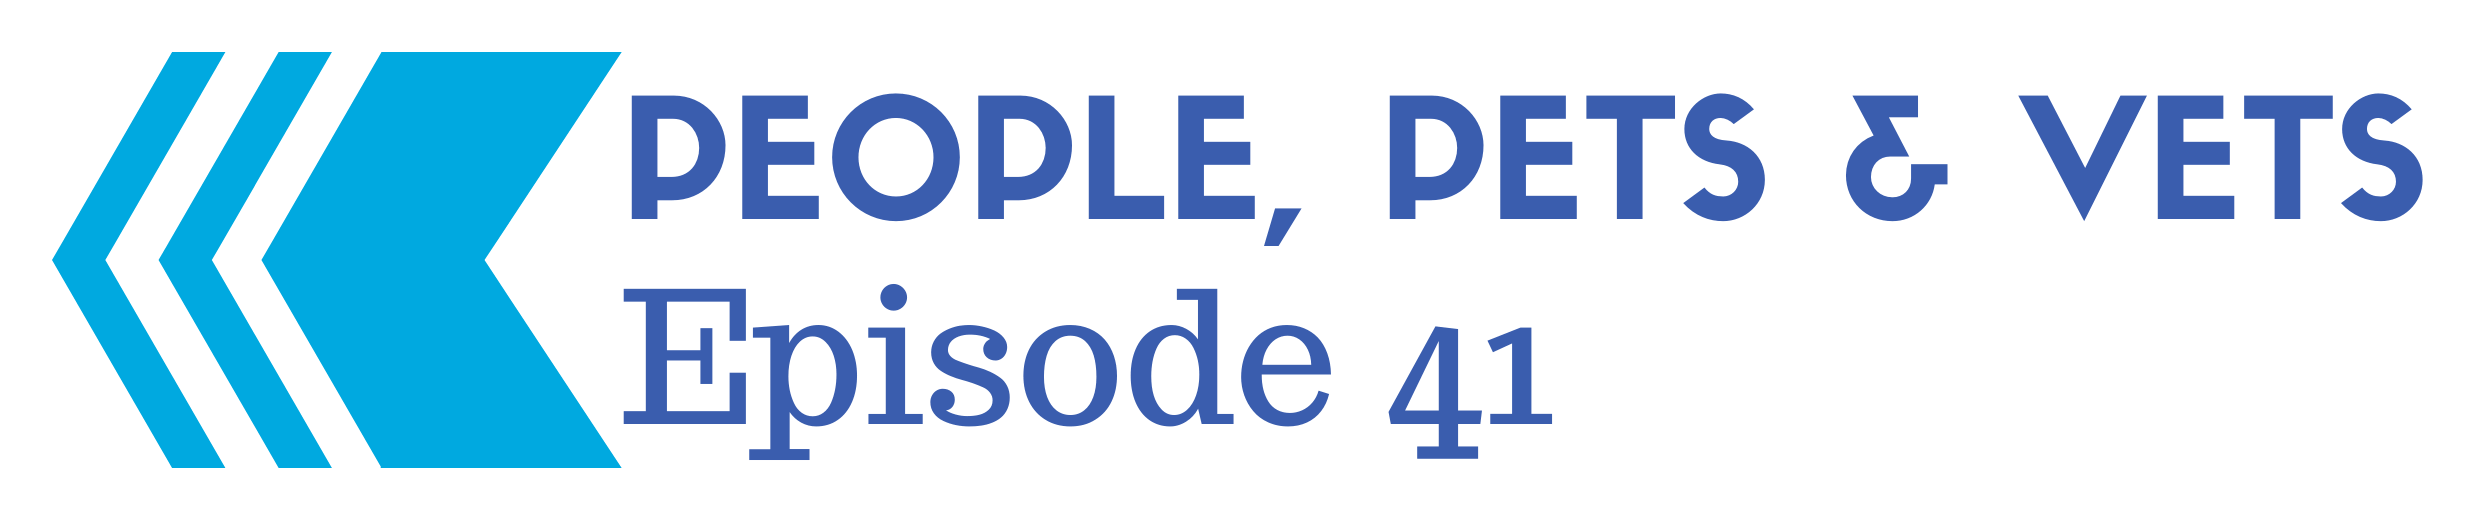 Back to Episode 41